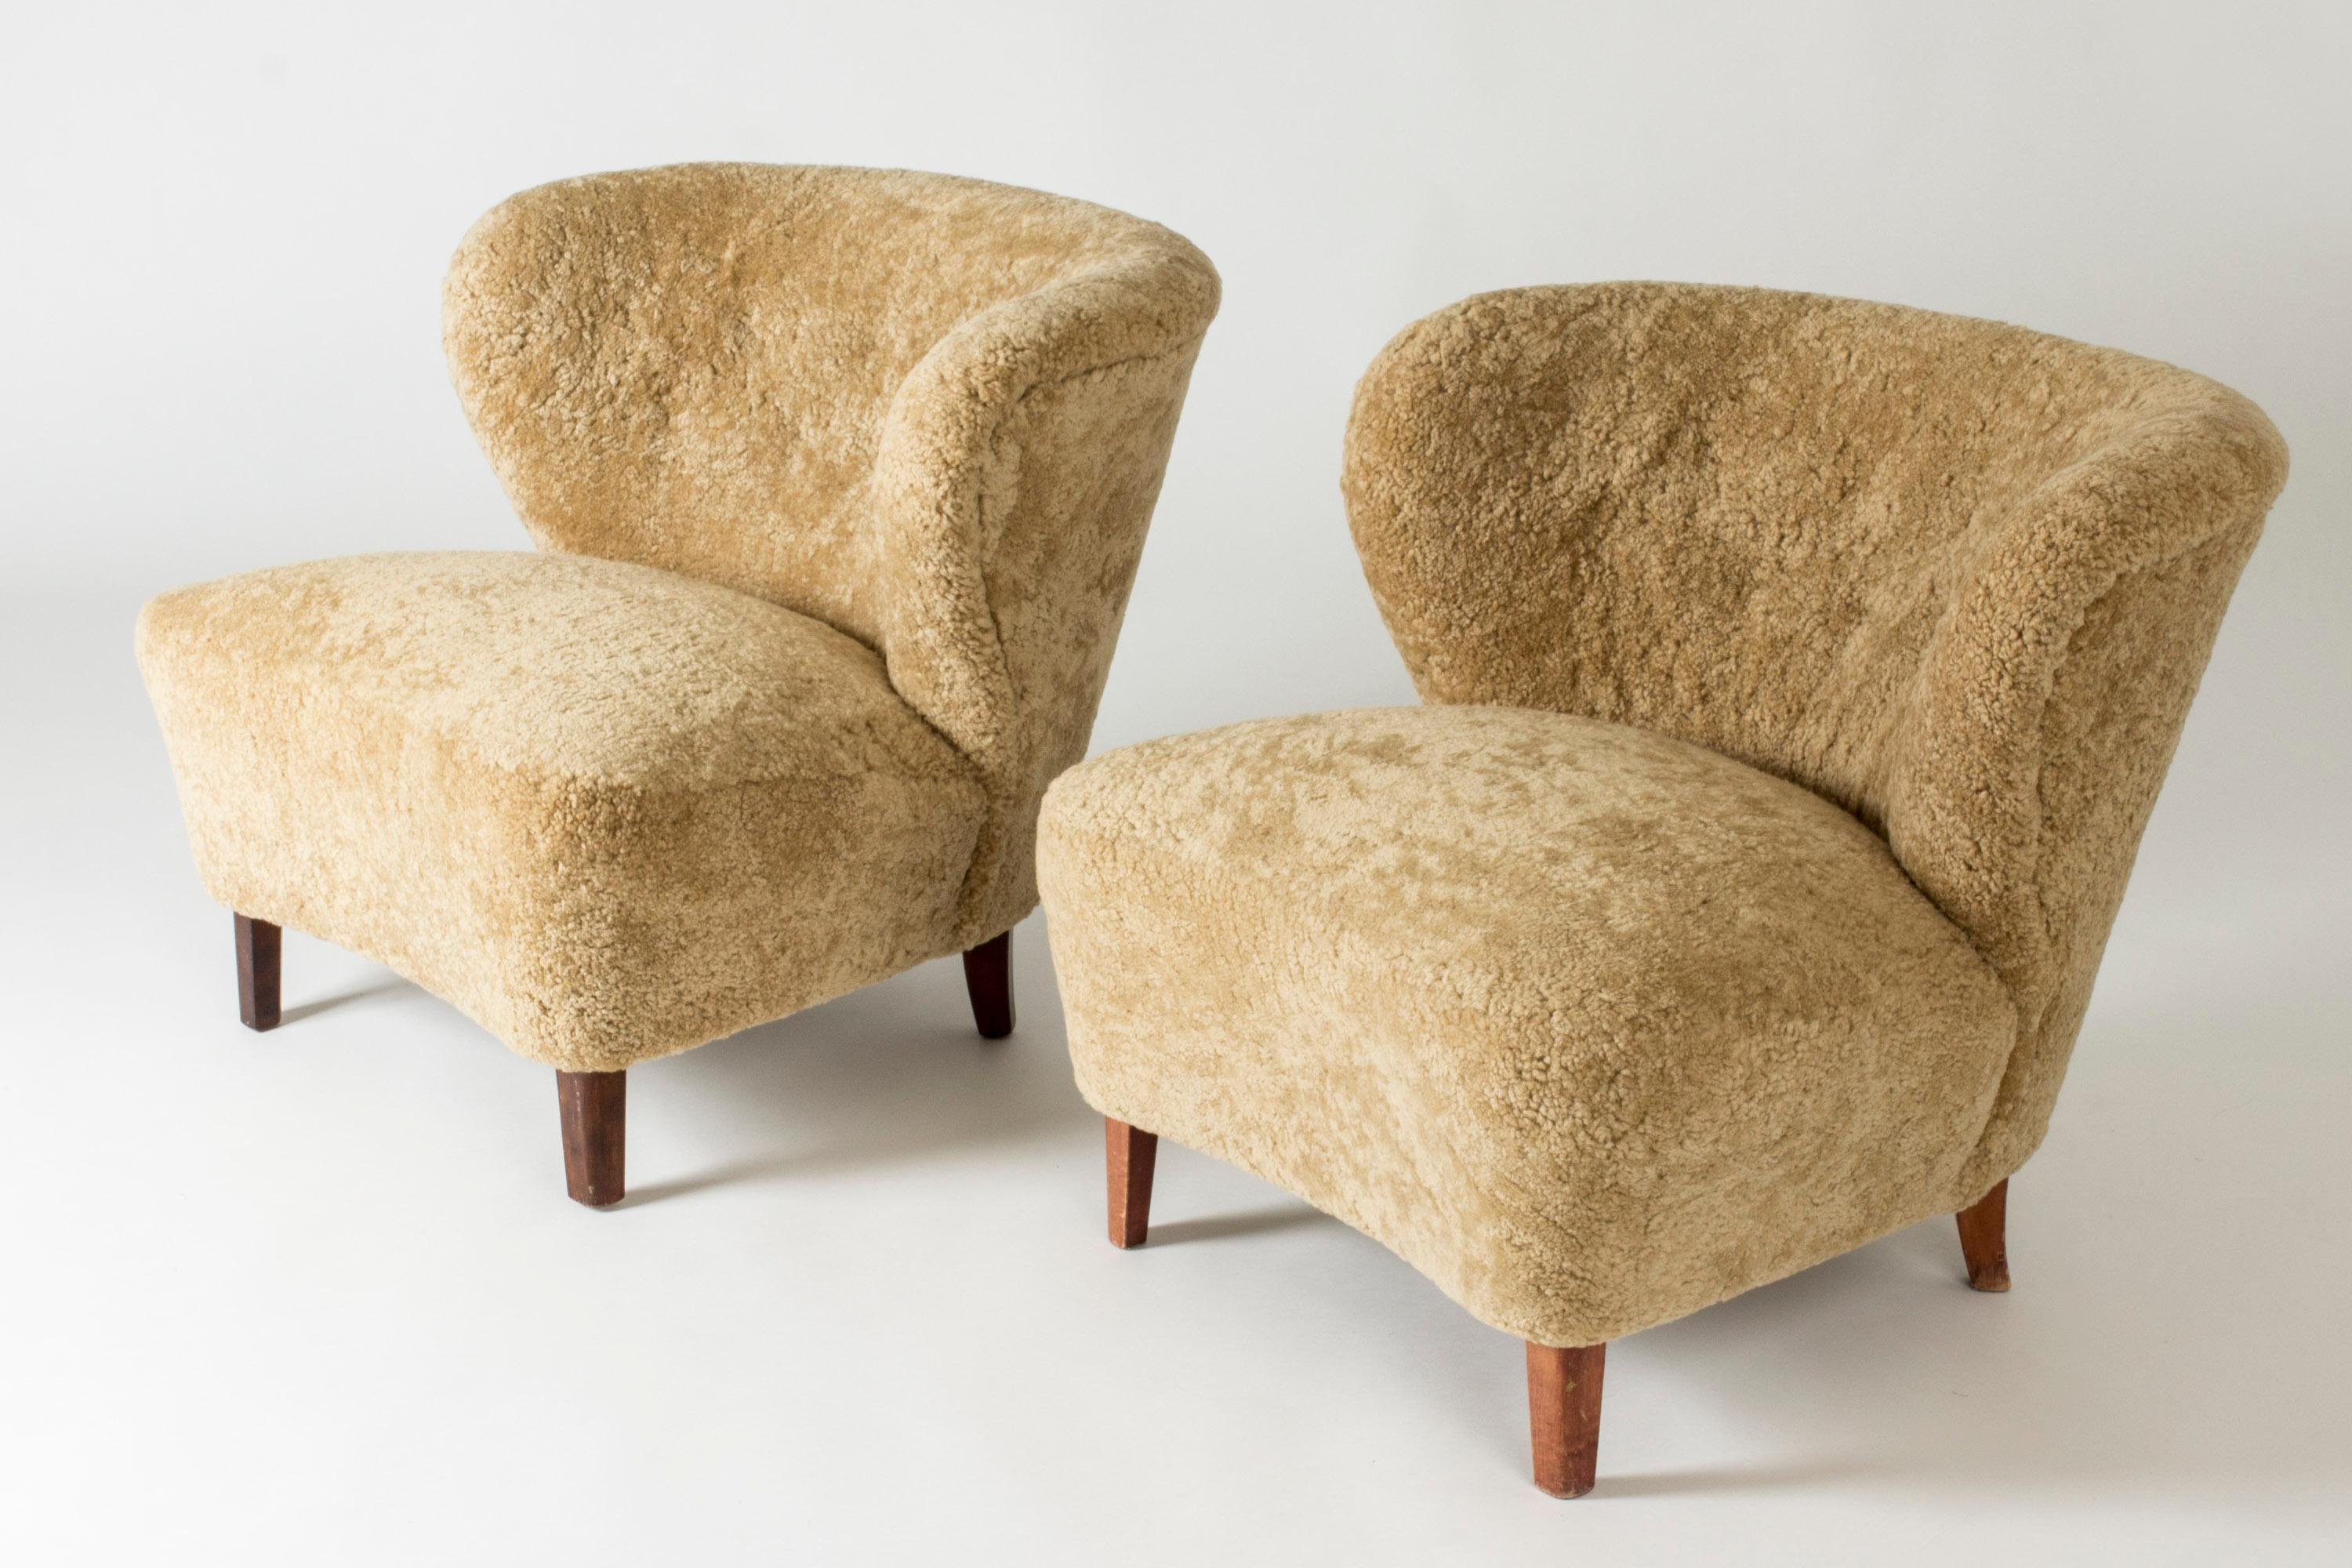 Pair of elegant lounge chairs by Gösta Jonsson, upholstered in caramel colored sheepskin. Chunky design with generous lines.